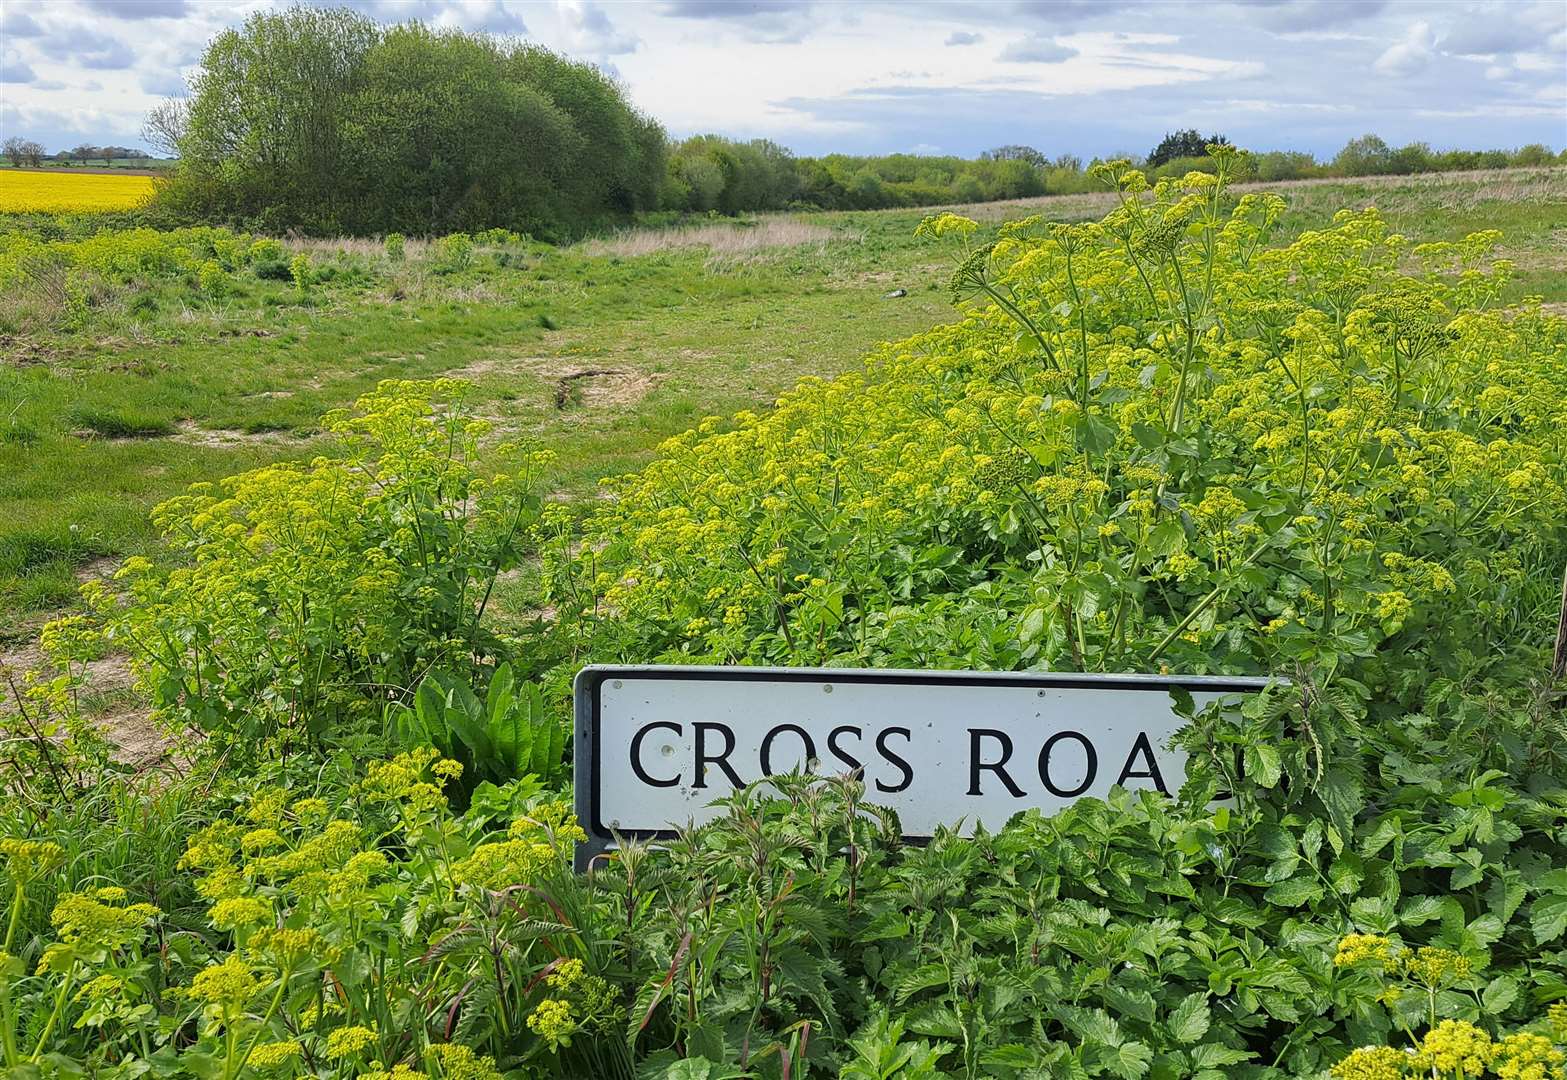 The other side of Cross Road in Deal, seen from the development site